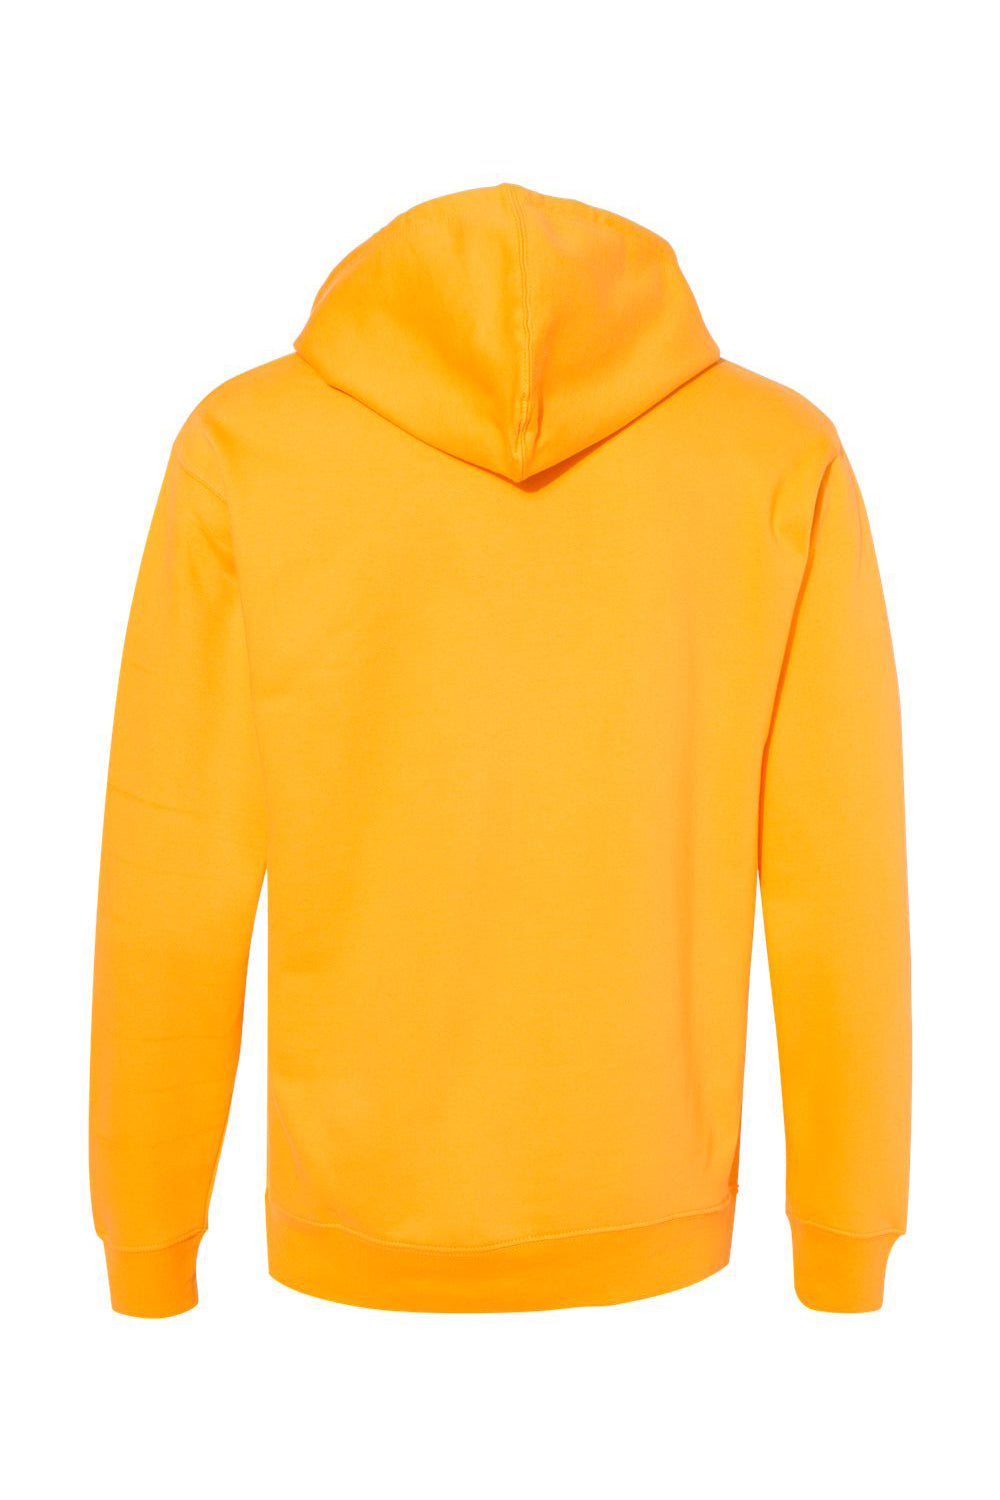 Independent Trading Co. SS4500 Mens Hooded Sweatshirt Hoodie Gold Flat Back